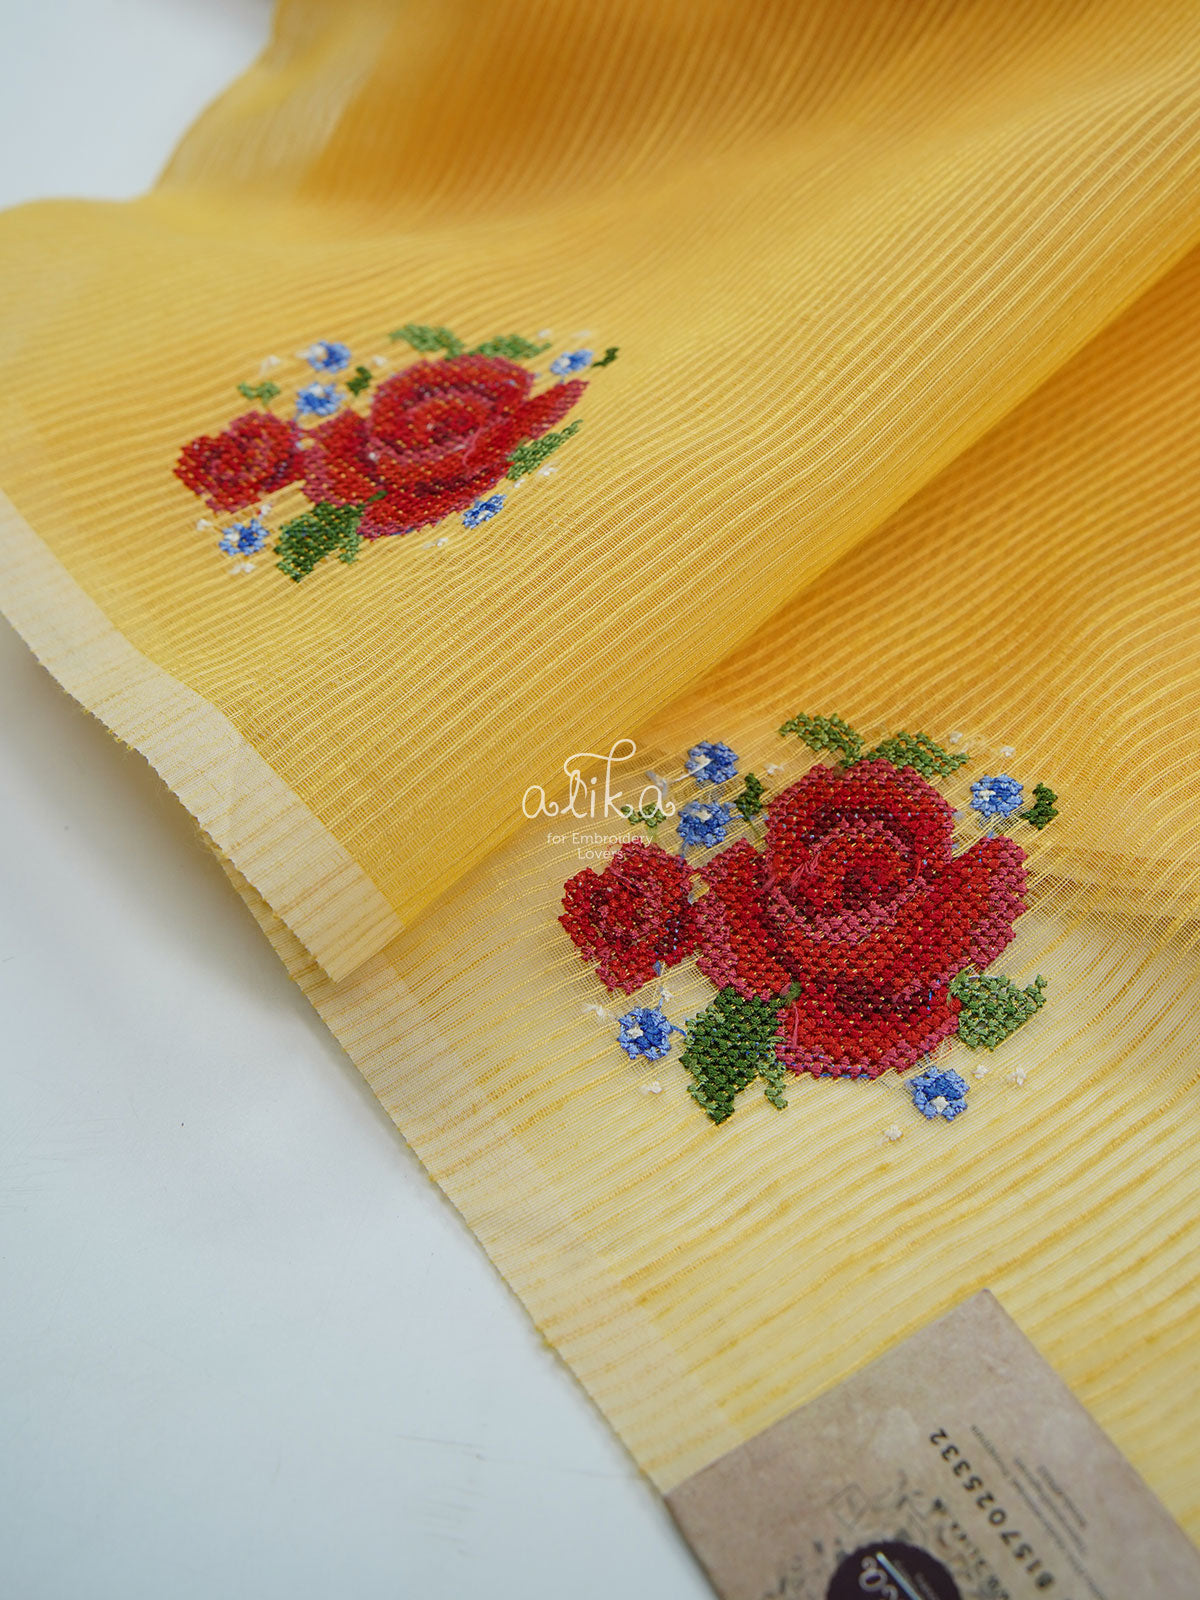 YELLOW  STRIPED KOTA  SAREE WITH FLORAL CROSS  STITCH EMBROIDERY